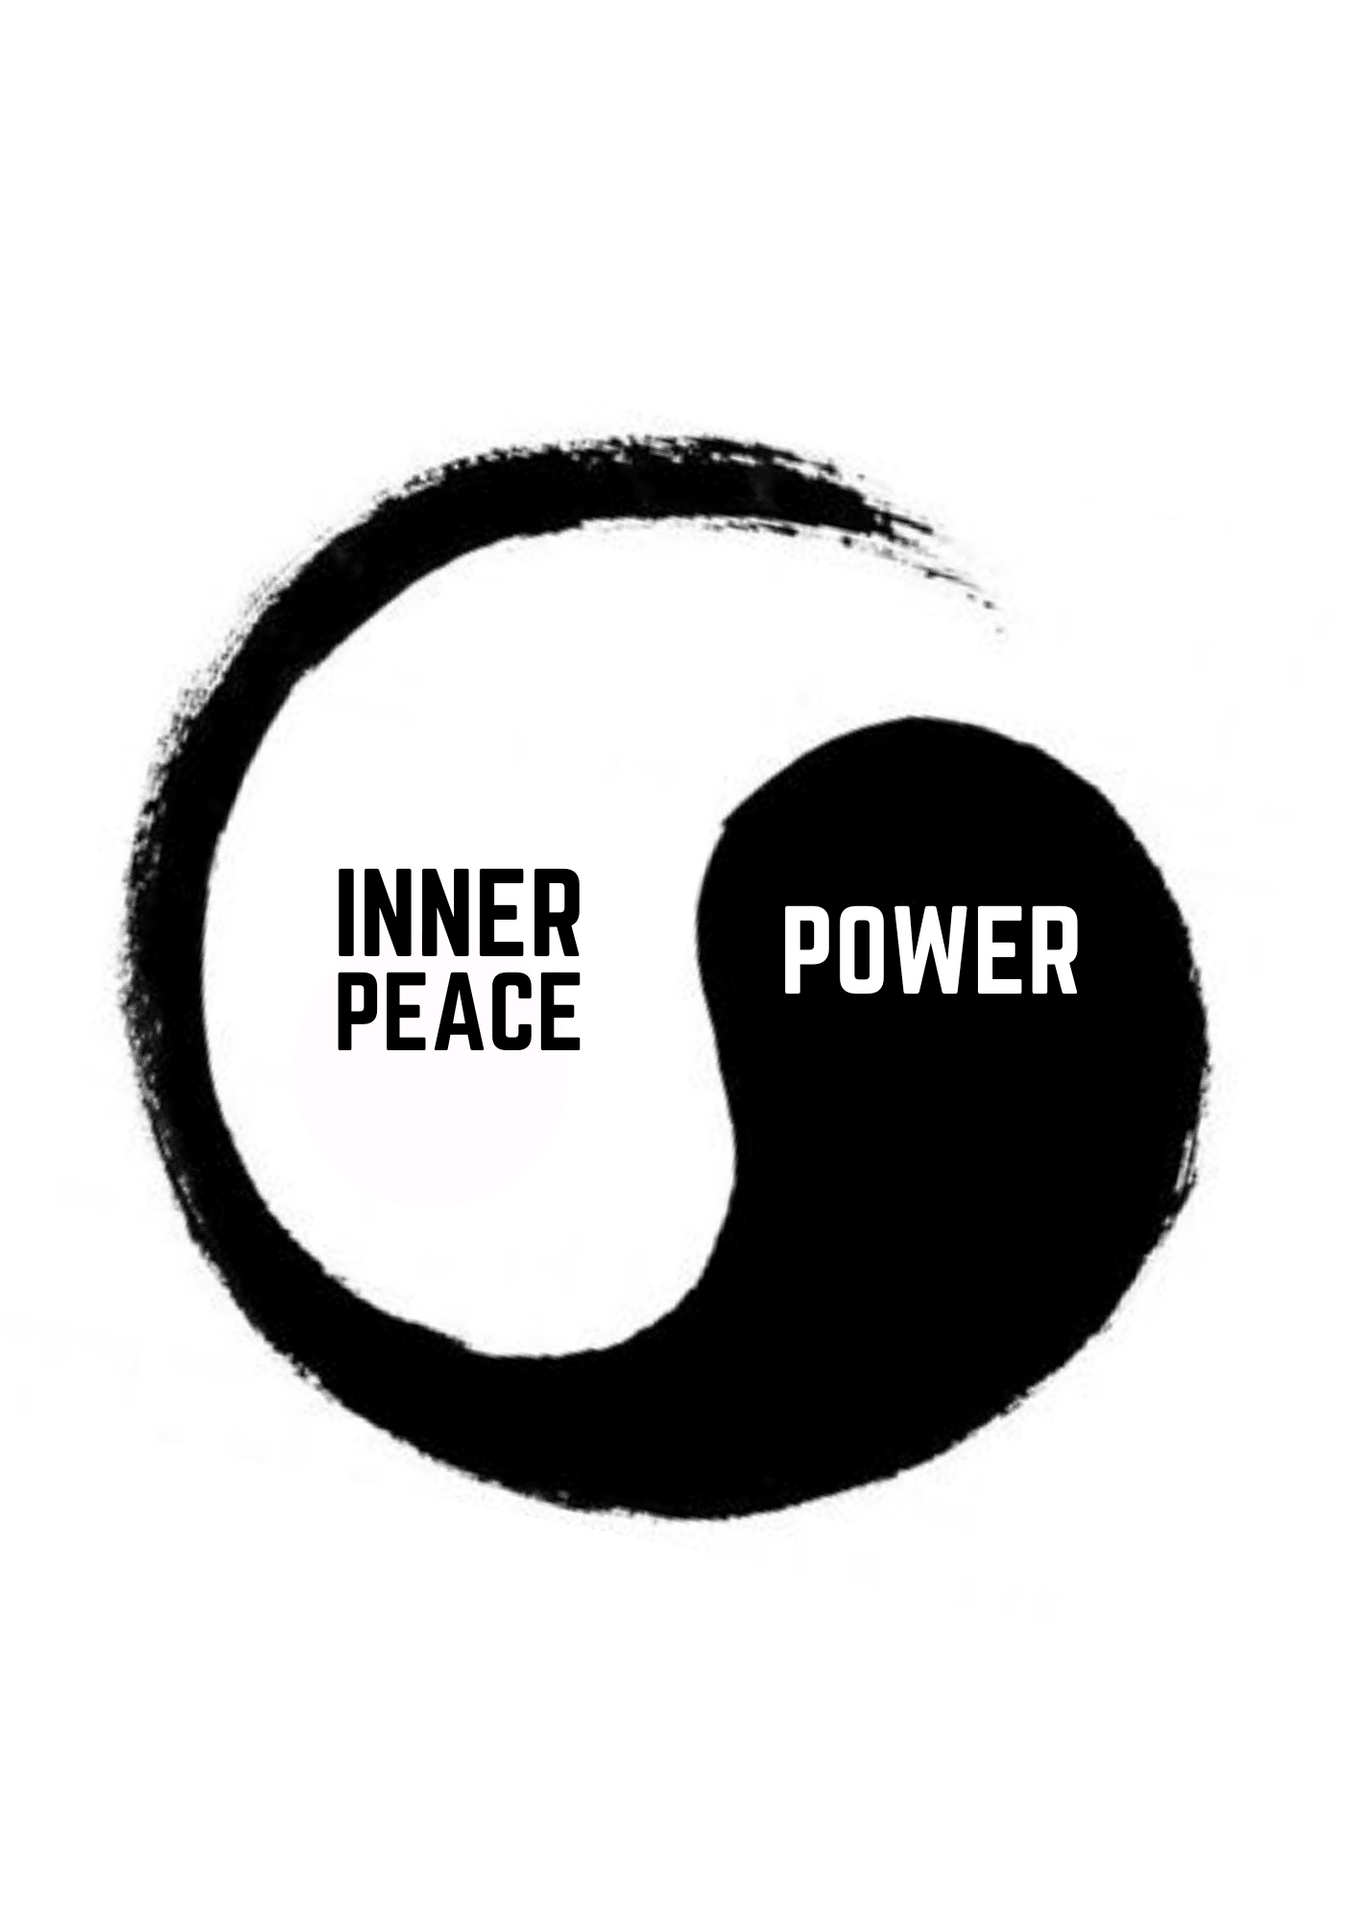 Inner Peace. Power. Confidence URBNTIGER